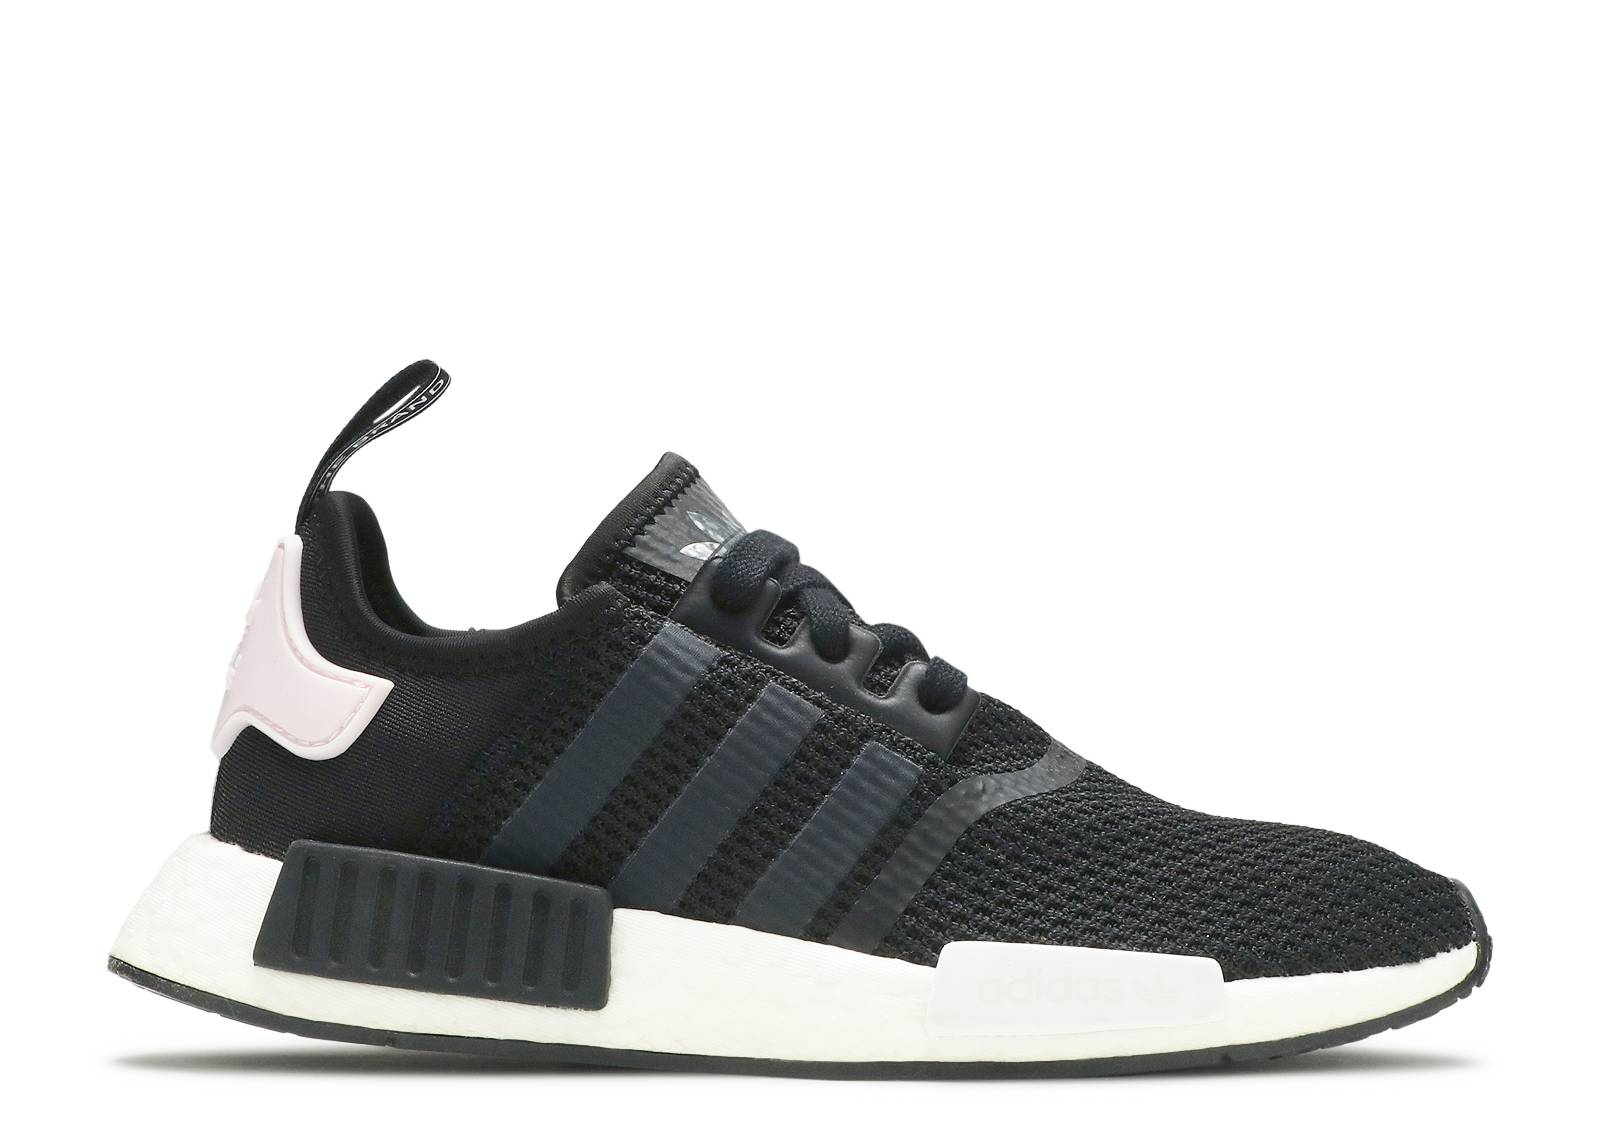 Wmns NMD_R1 'Black Clear Pink'